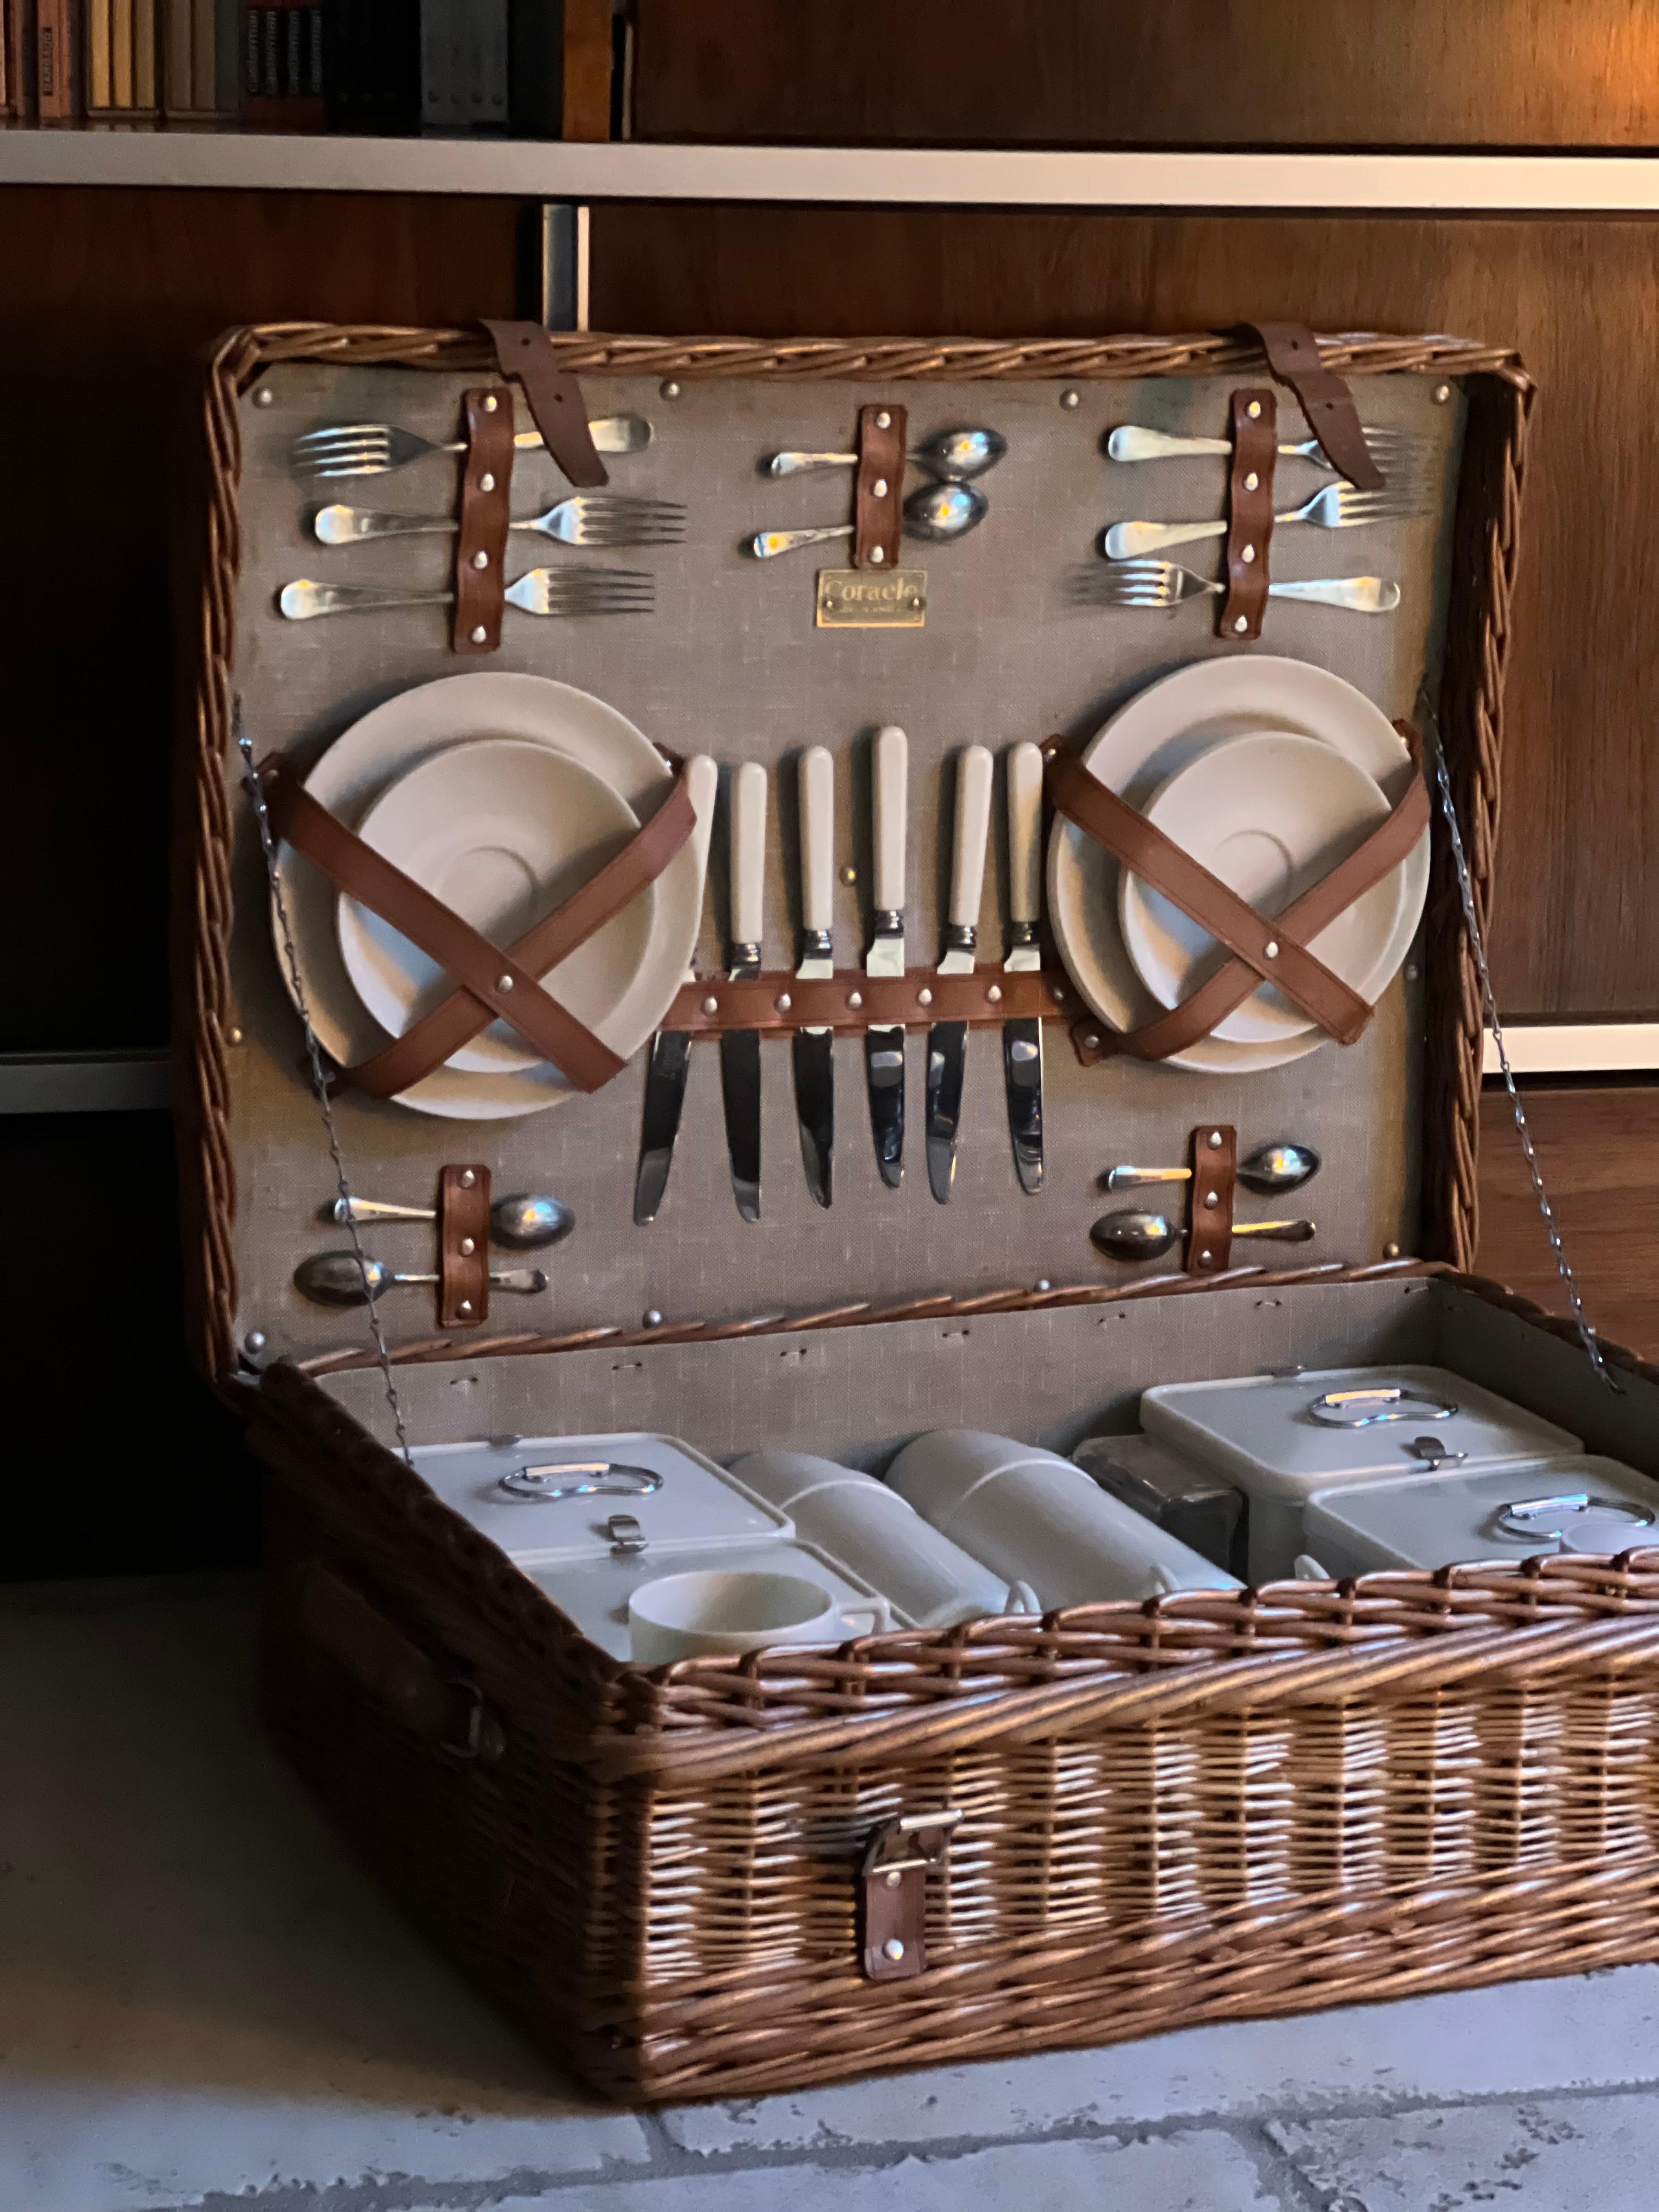 Picnic basket for 6 people Coracle by G. W. Scott and Son Circa 1930 in wicker with handles, lock and clasp in brass, the lid opening on an interior lined with canvas with wicker carcass, containing:
3 Thermos
4 Boxes
Cutlery for 6 people (silver